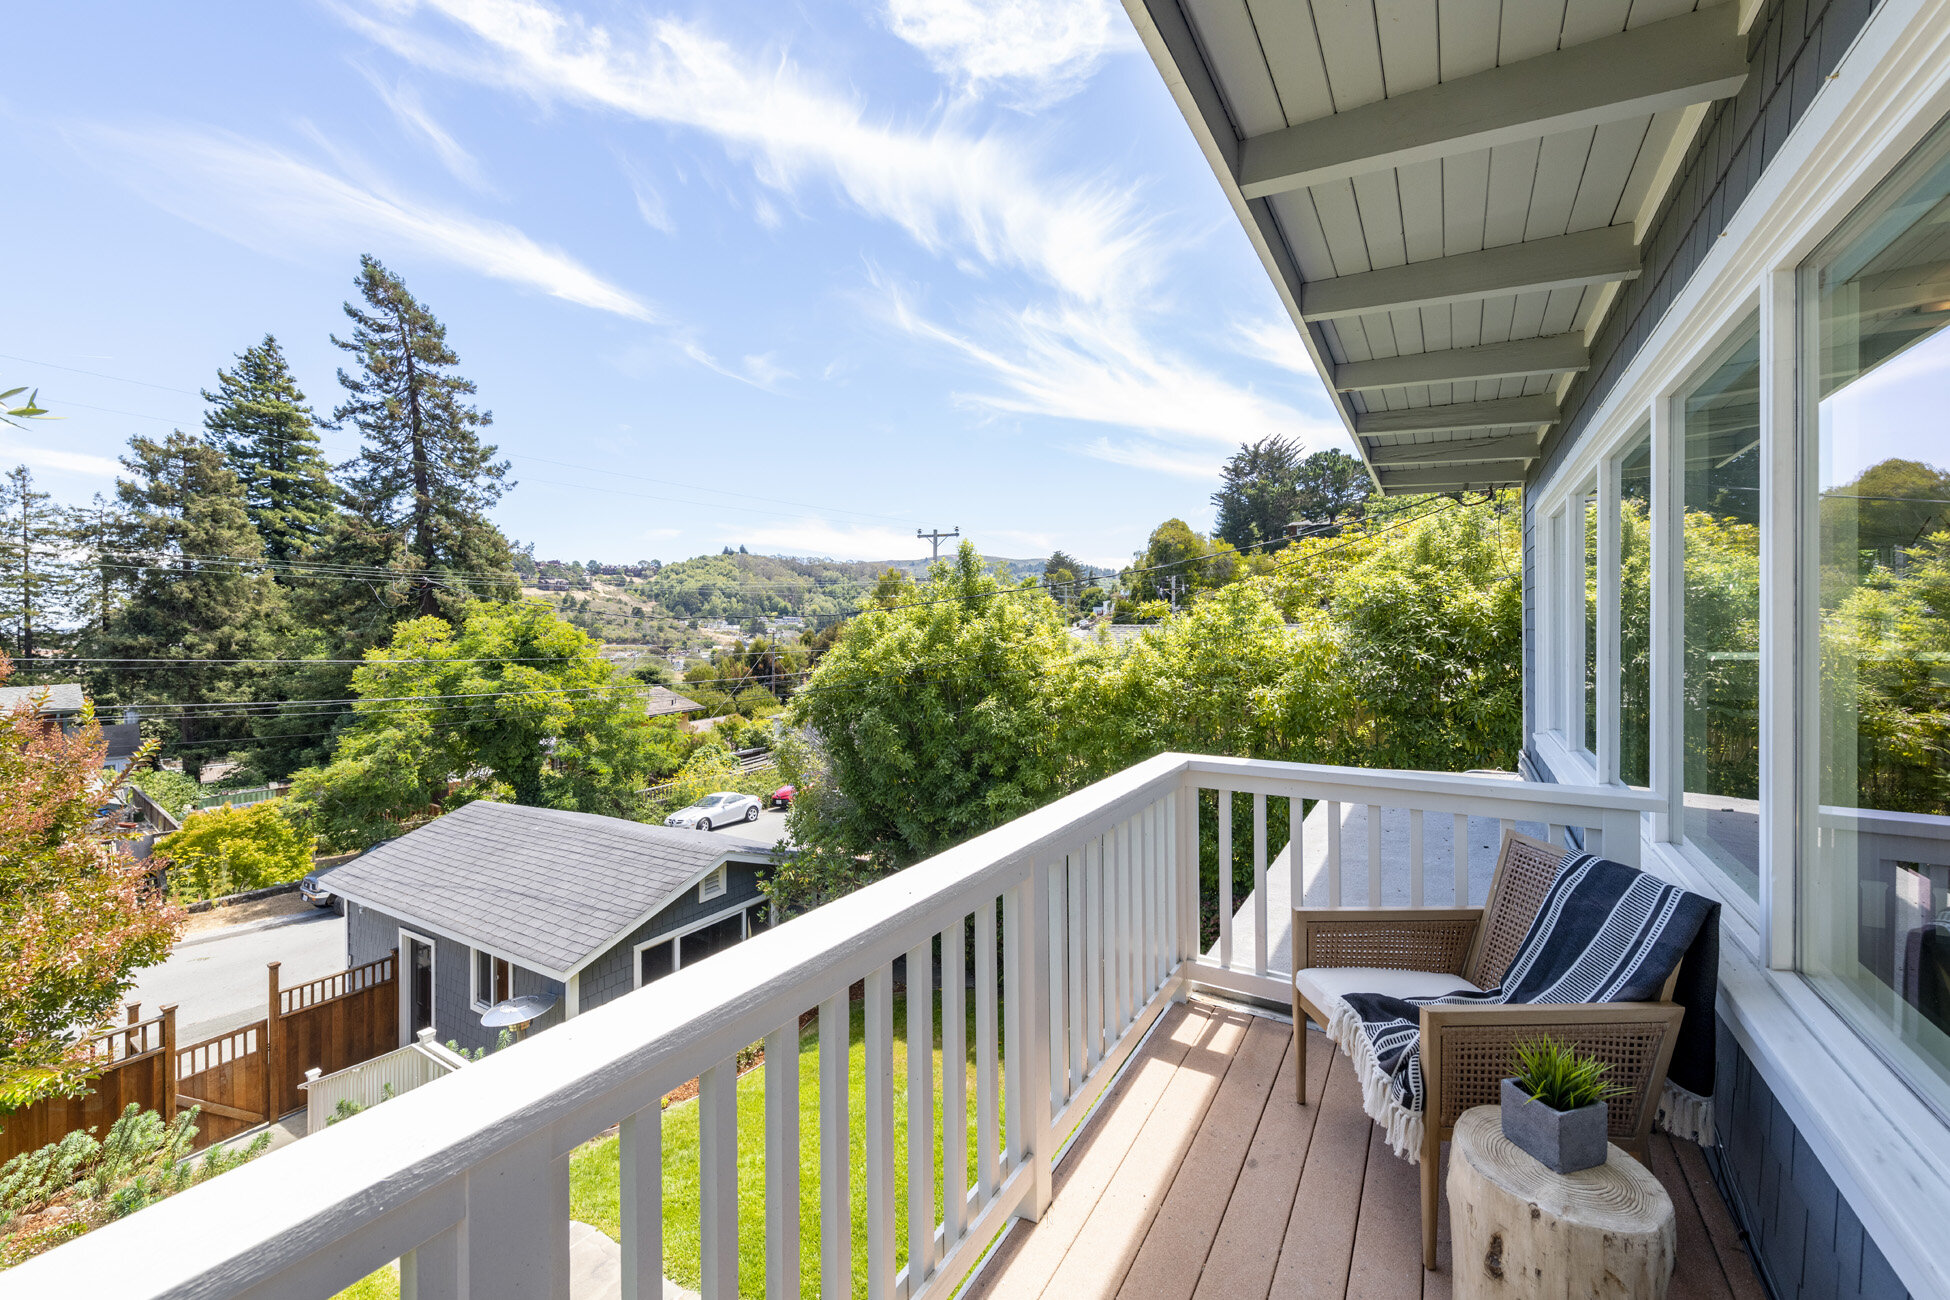 32_balcony - 216 Morning Sun Mill Valley Real Estate For Sale - Listed by Allie Fornesi Top Marin County Realtor.jpg